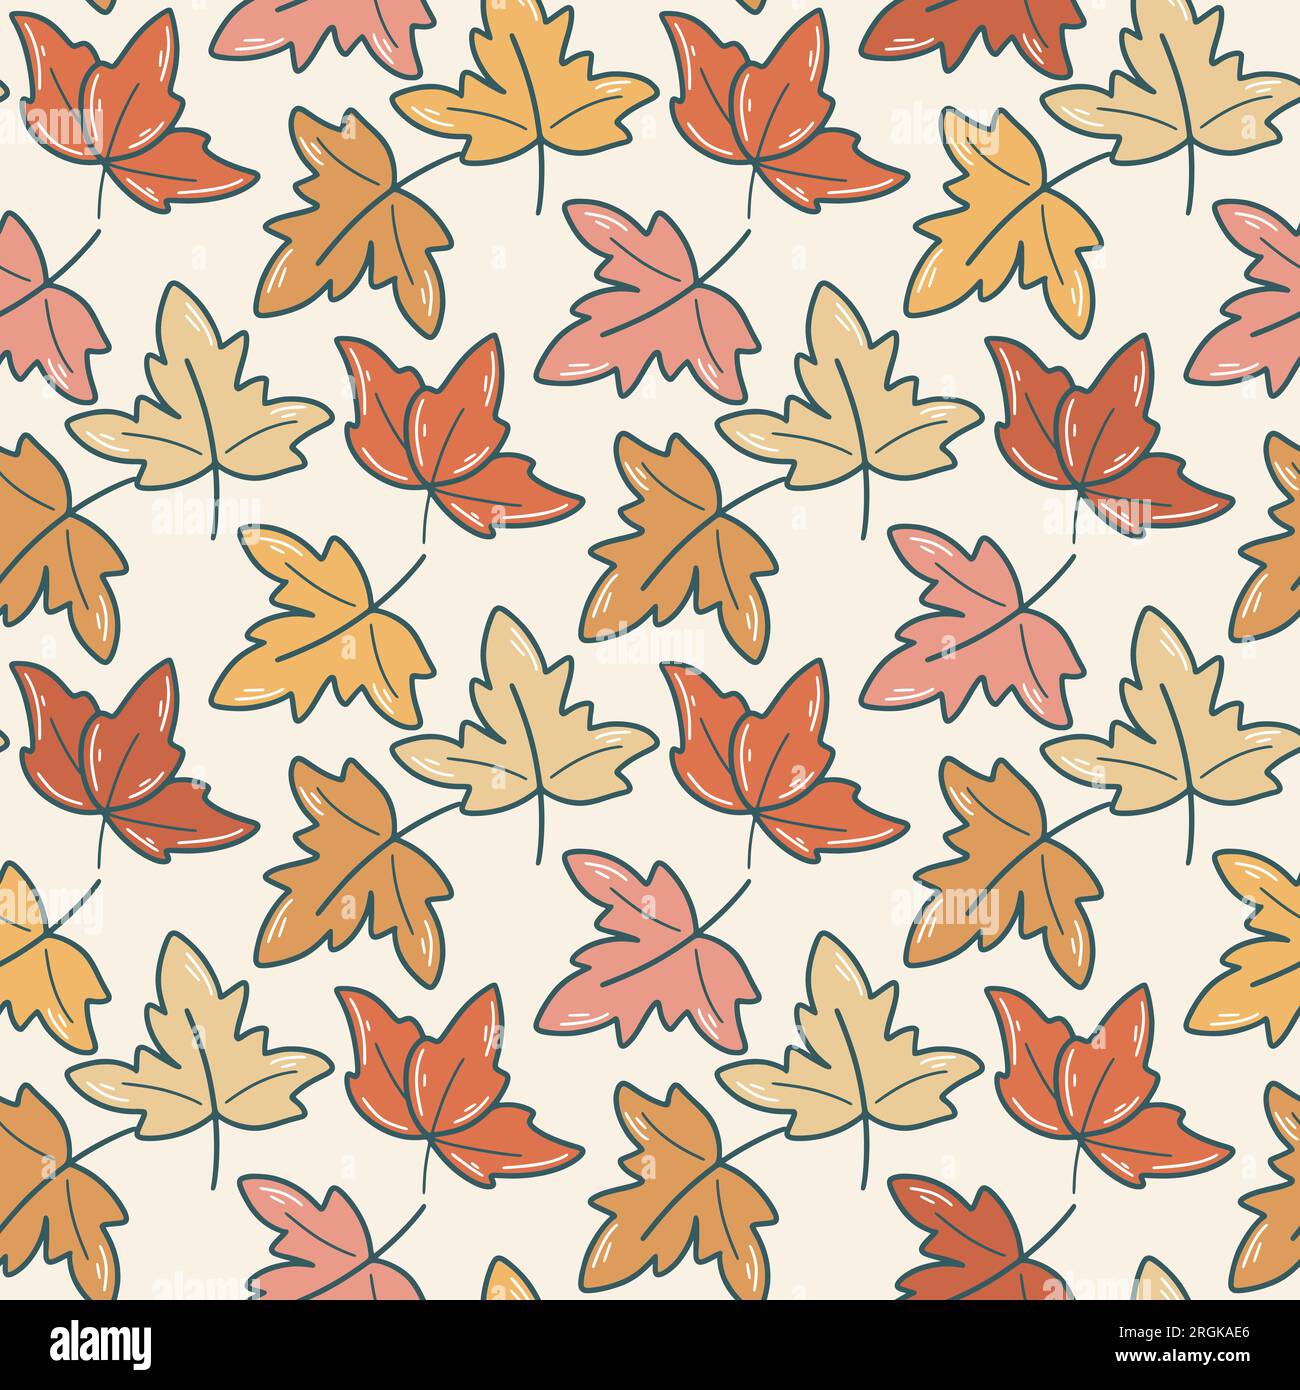 Maple leaves autumn seamless pattern. Red, orange yellow foliage background. Beautiful fall season print for textile, paper, wallpaper and design Stock Vector